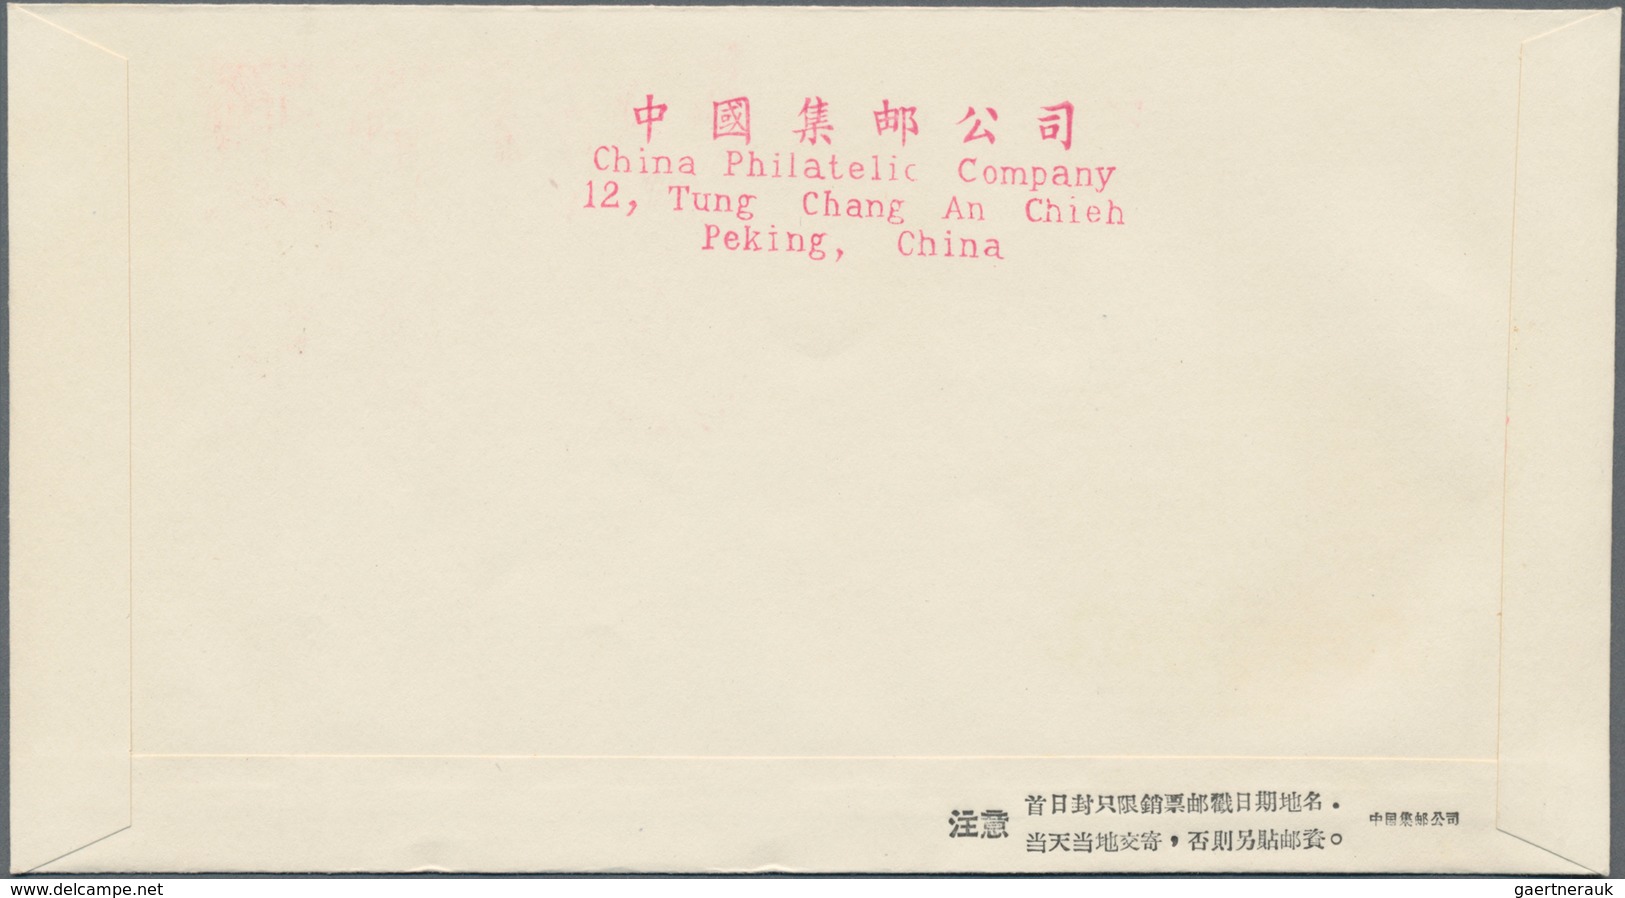 China - Volksrepublik: 1959, 6 First Day covers of C58, C59, C60, C61, S31 and S34, bearing the full